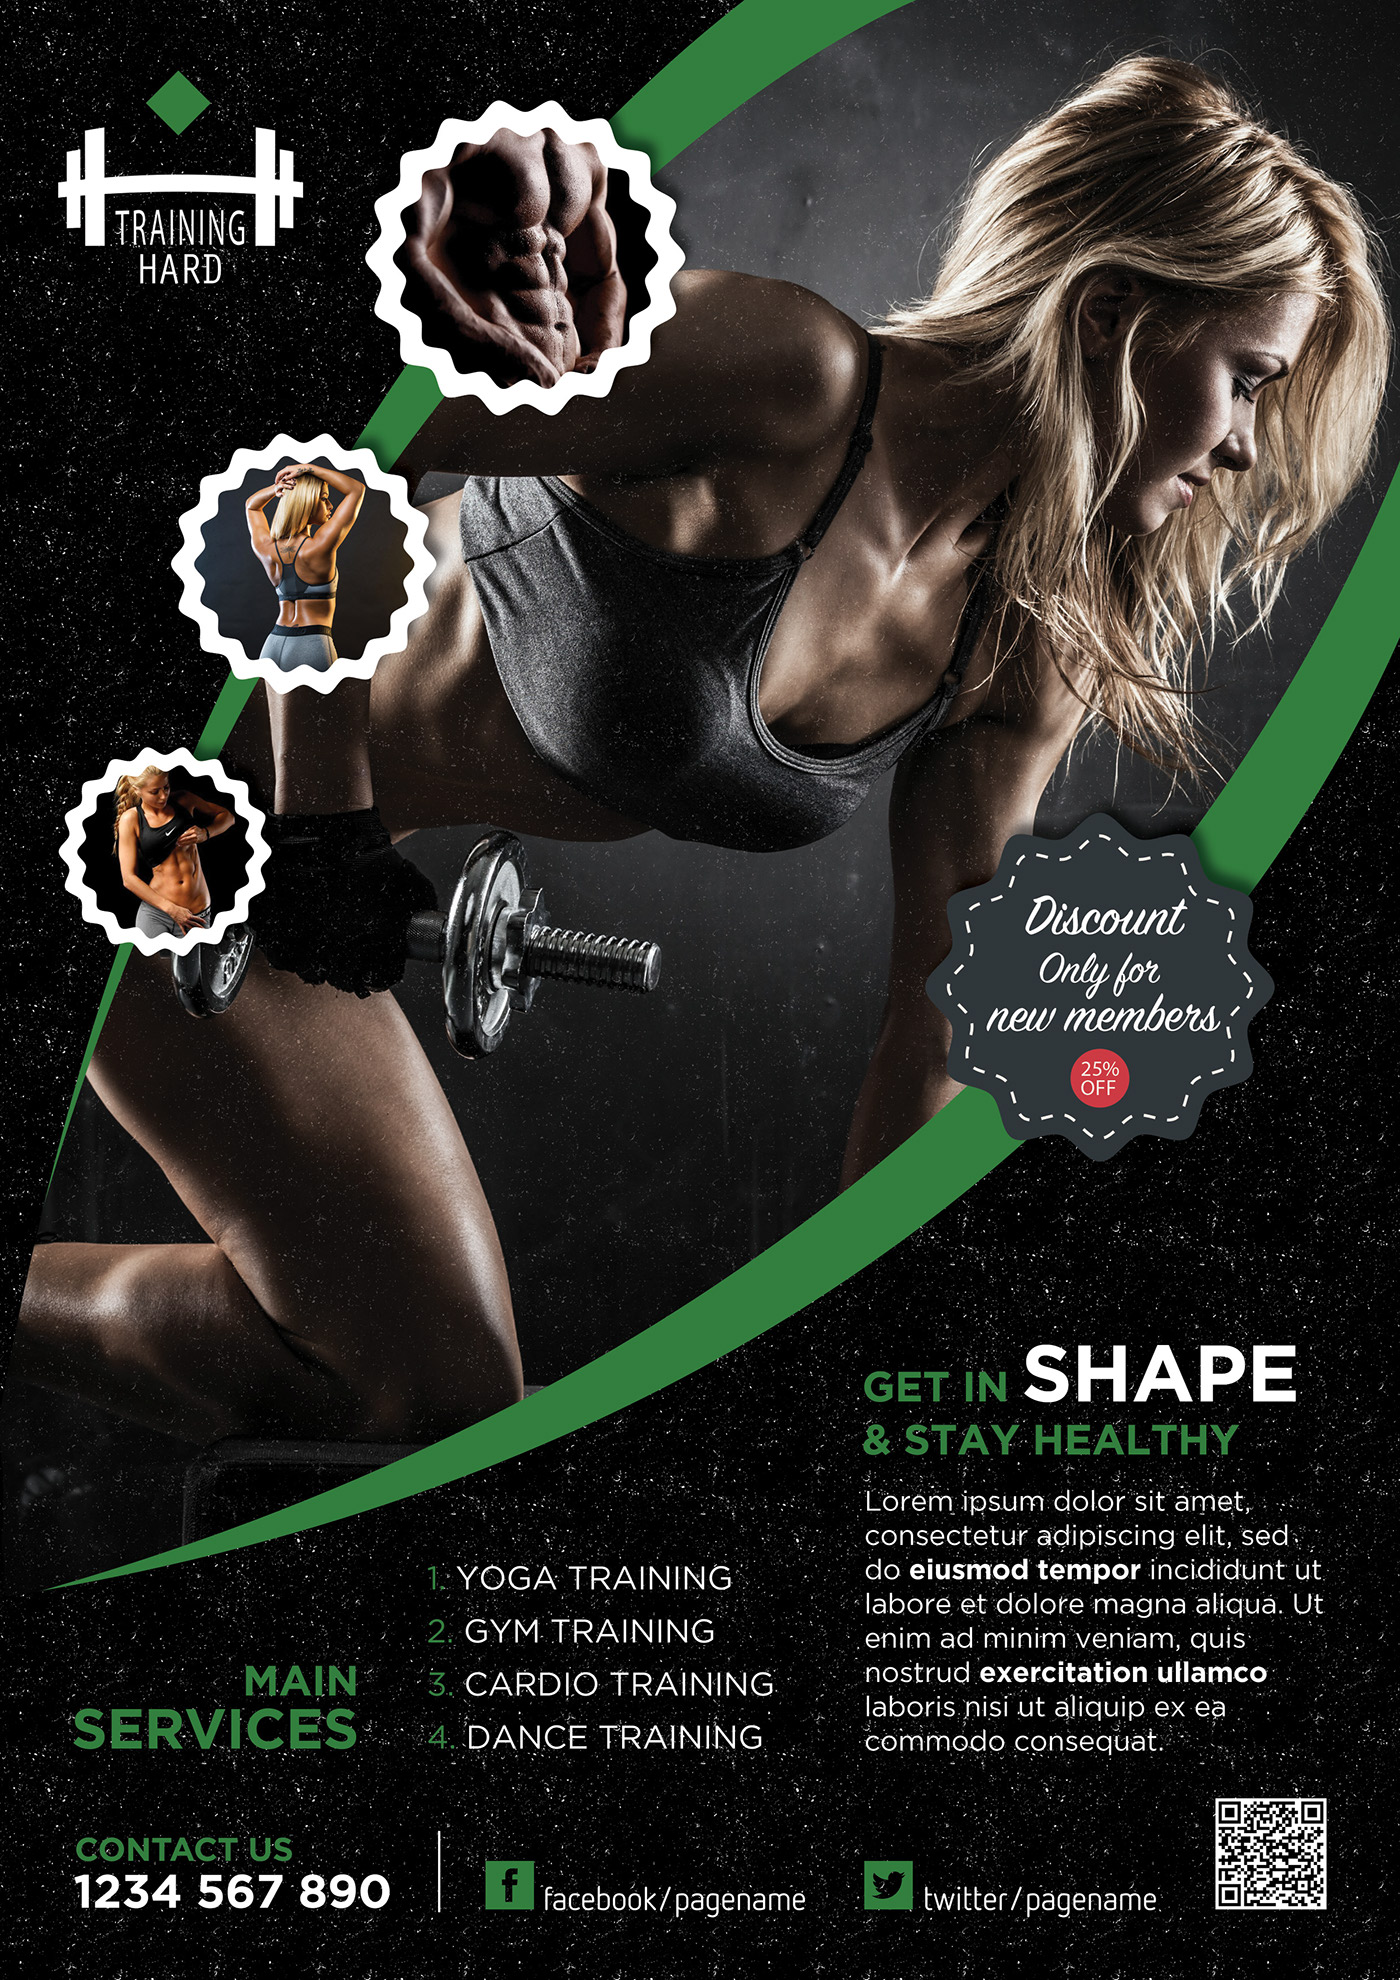 creative psd download fitness flyer psd fitness offer flyer psd free fitness flyer Free Flyer mockup free flyer PSD Free PSD download gym flyer Professional Fitness Flyer Free PSD PSD